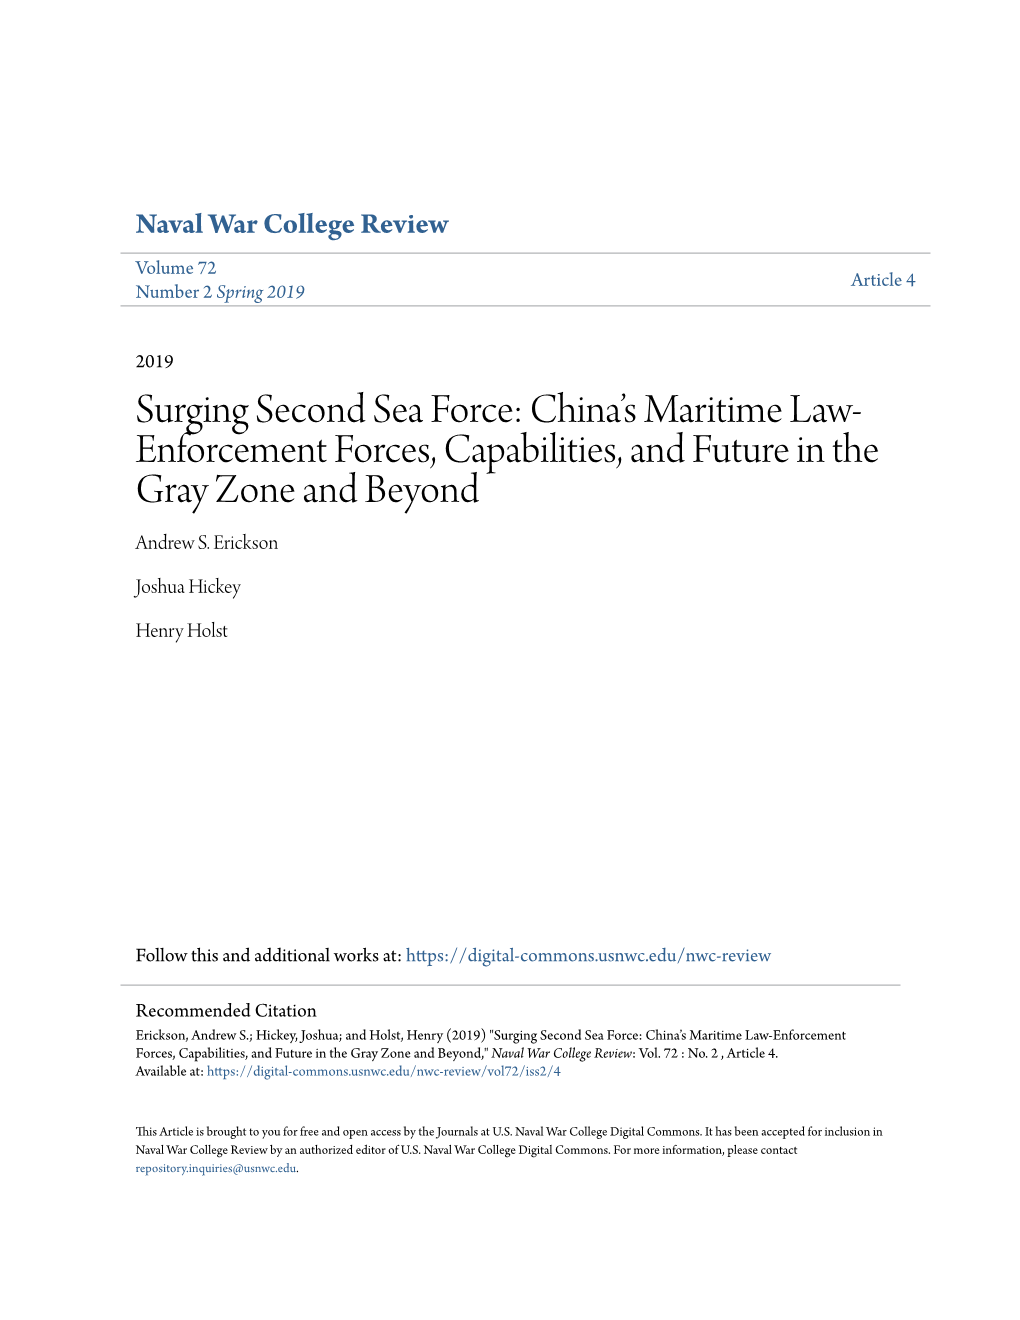 China's Maritime Law-Enforcement Forces, Capabilities, and Future In